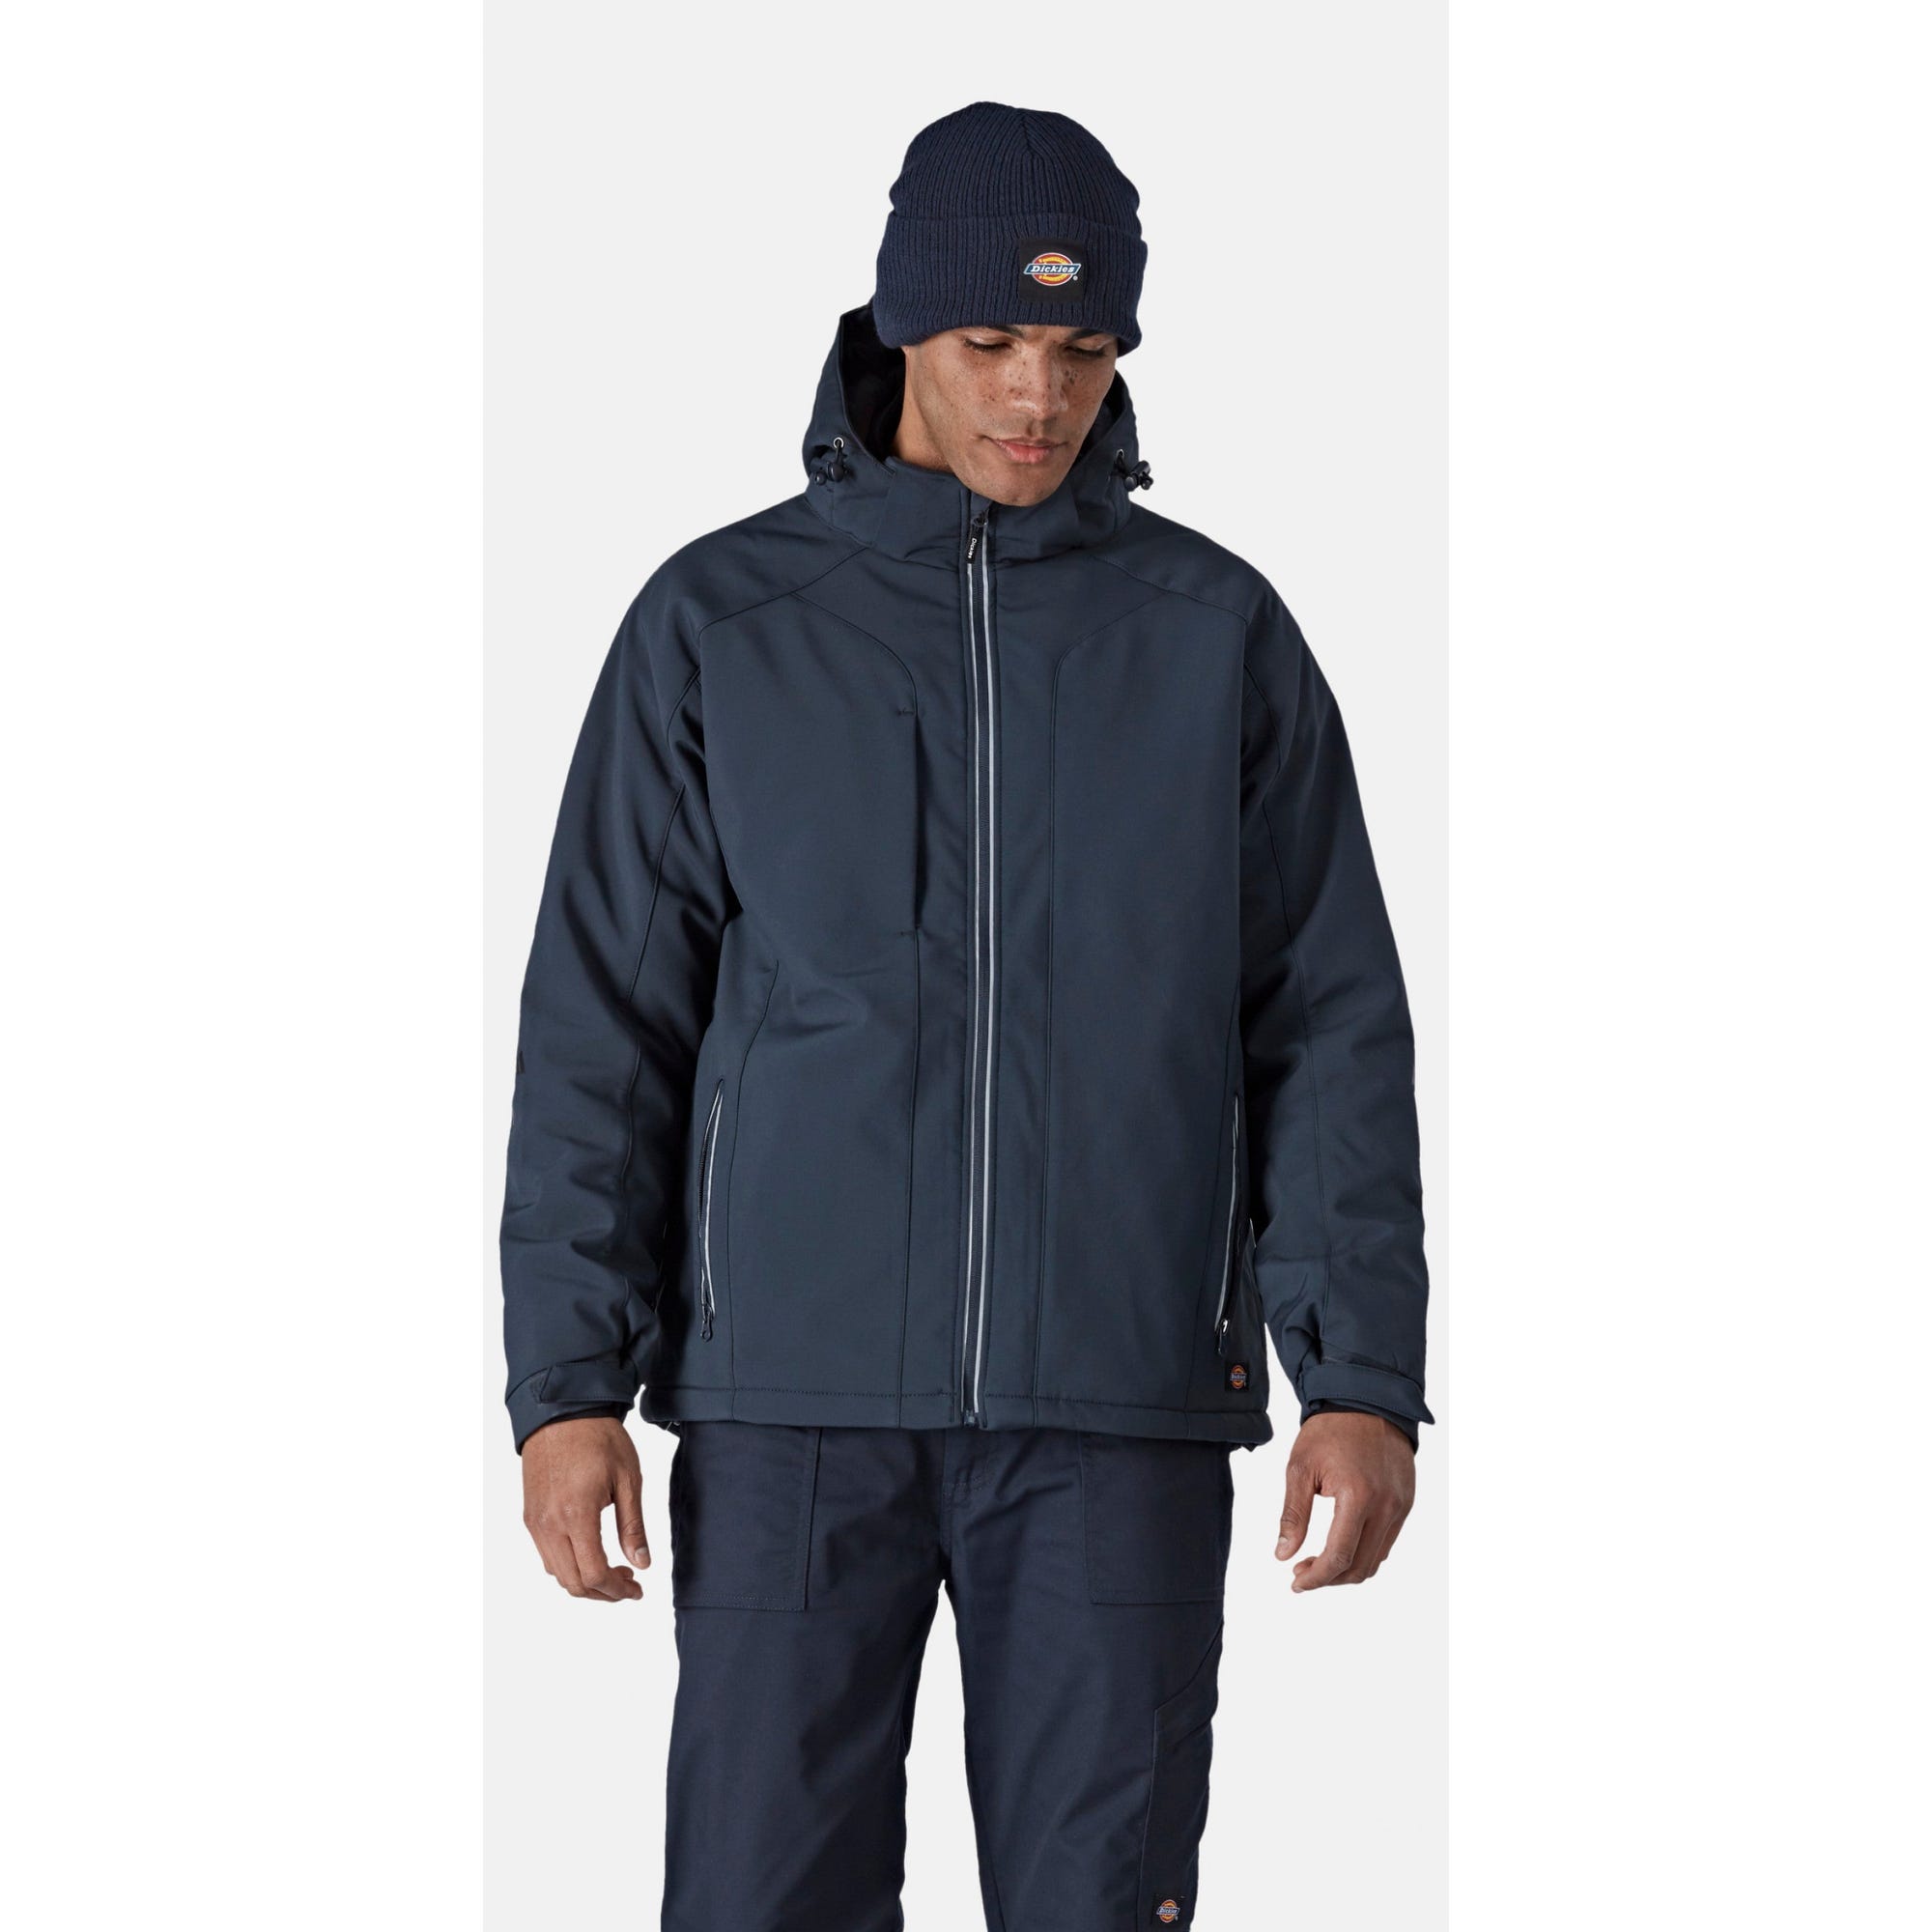 Veste d'Hiver Softshell Bleu marine - Dickies - Taille M 5